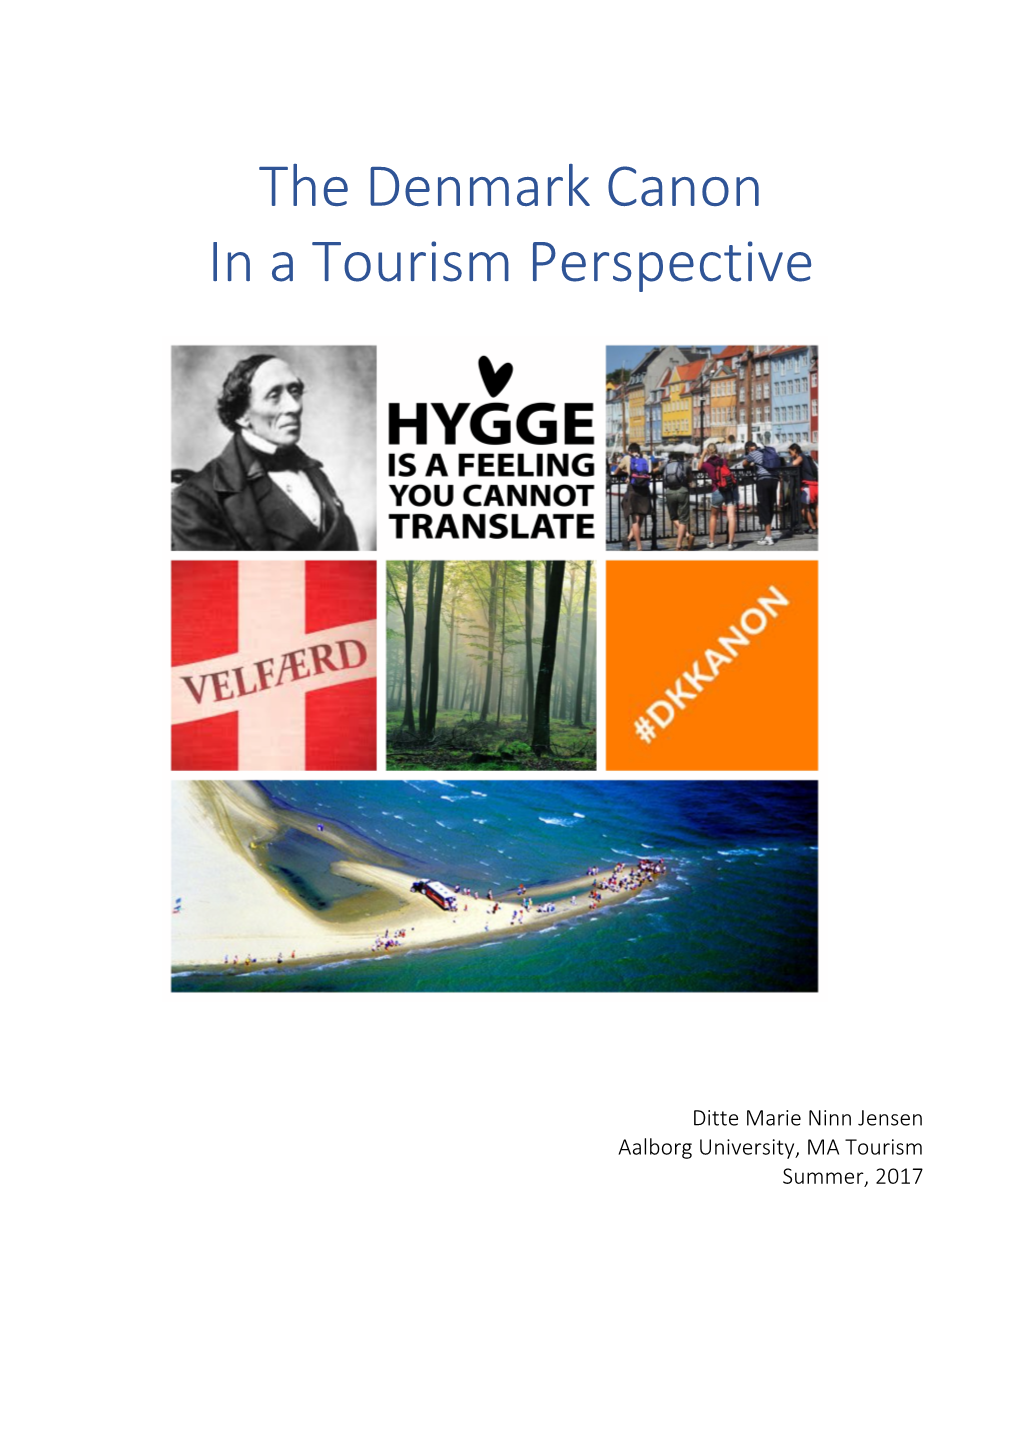 The Denmark Canon in a Tourism Perspective